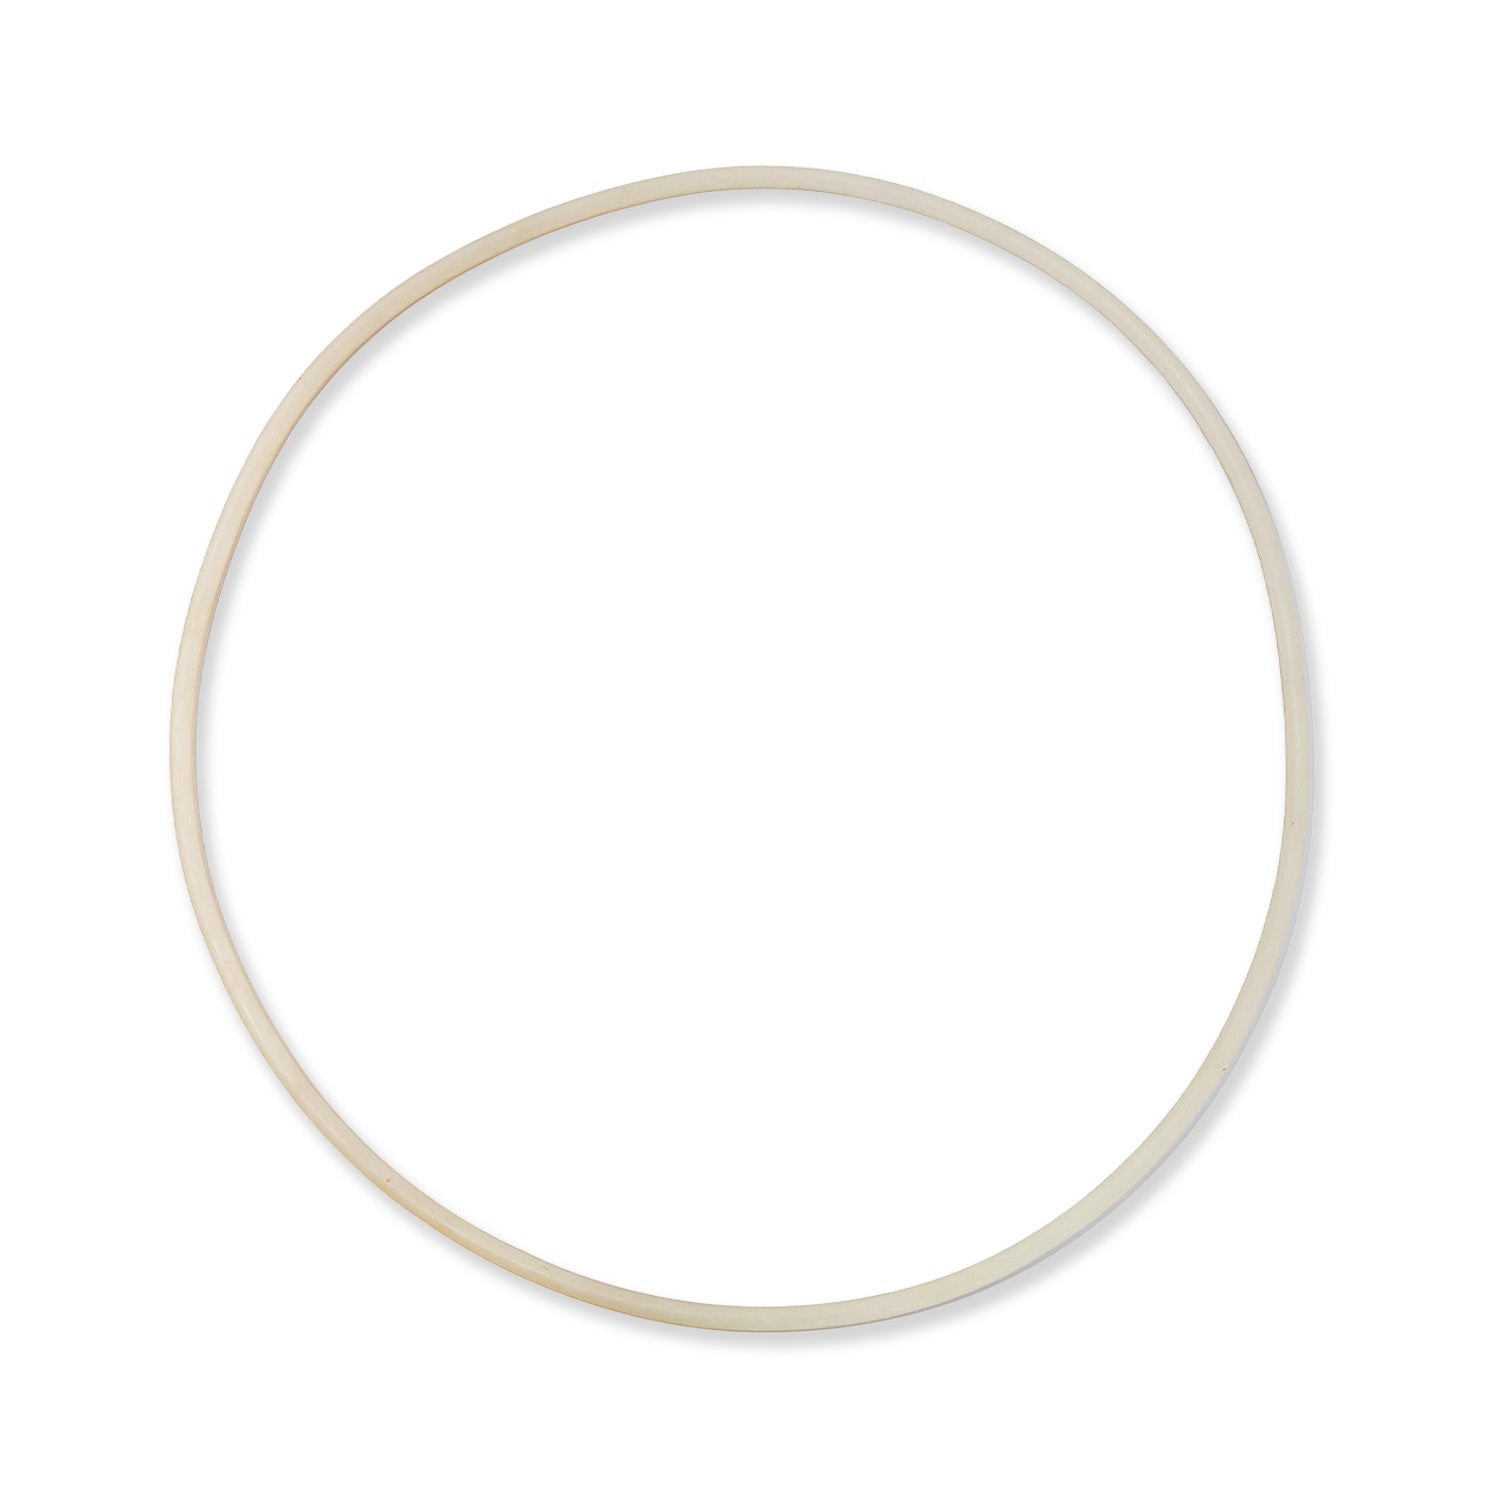 300L THI Gasket, Opaque Silicone, 670mm diameter